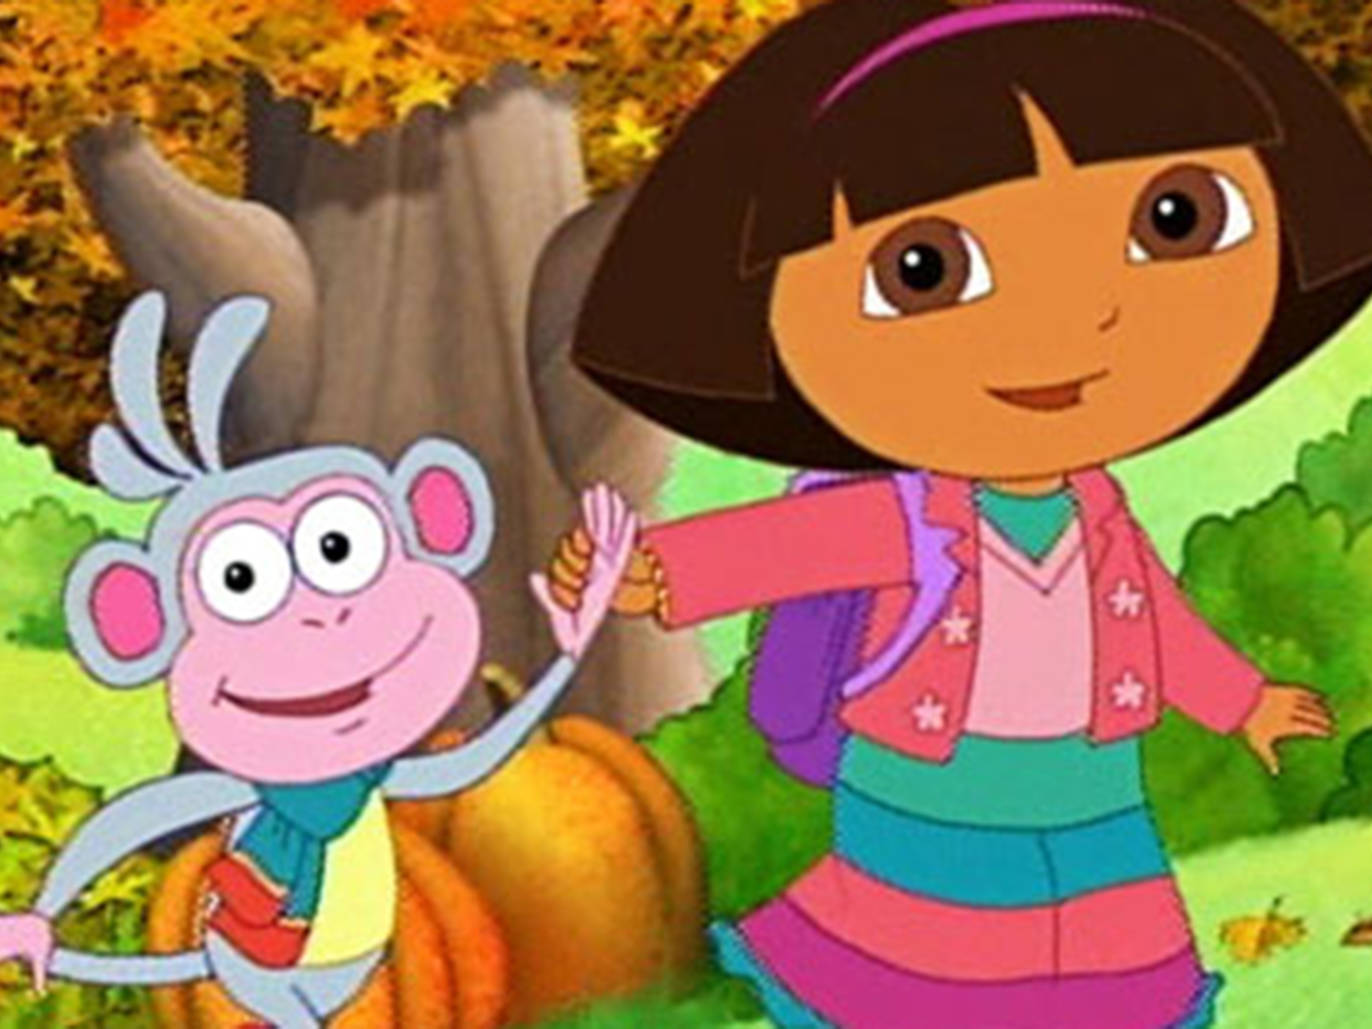 The Best Kids TV Shows | TV shows for kids and families